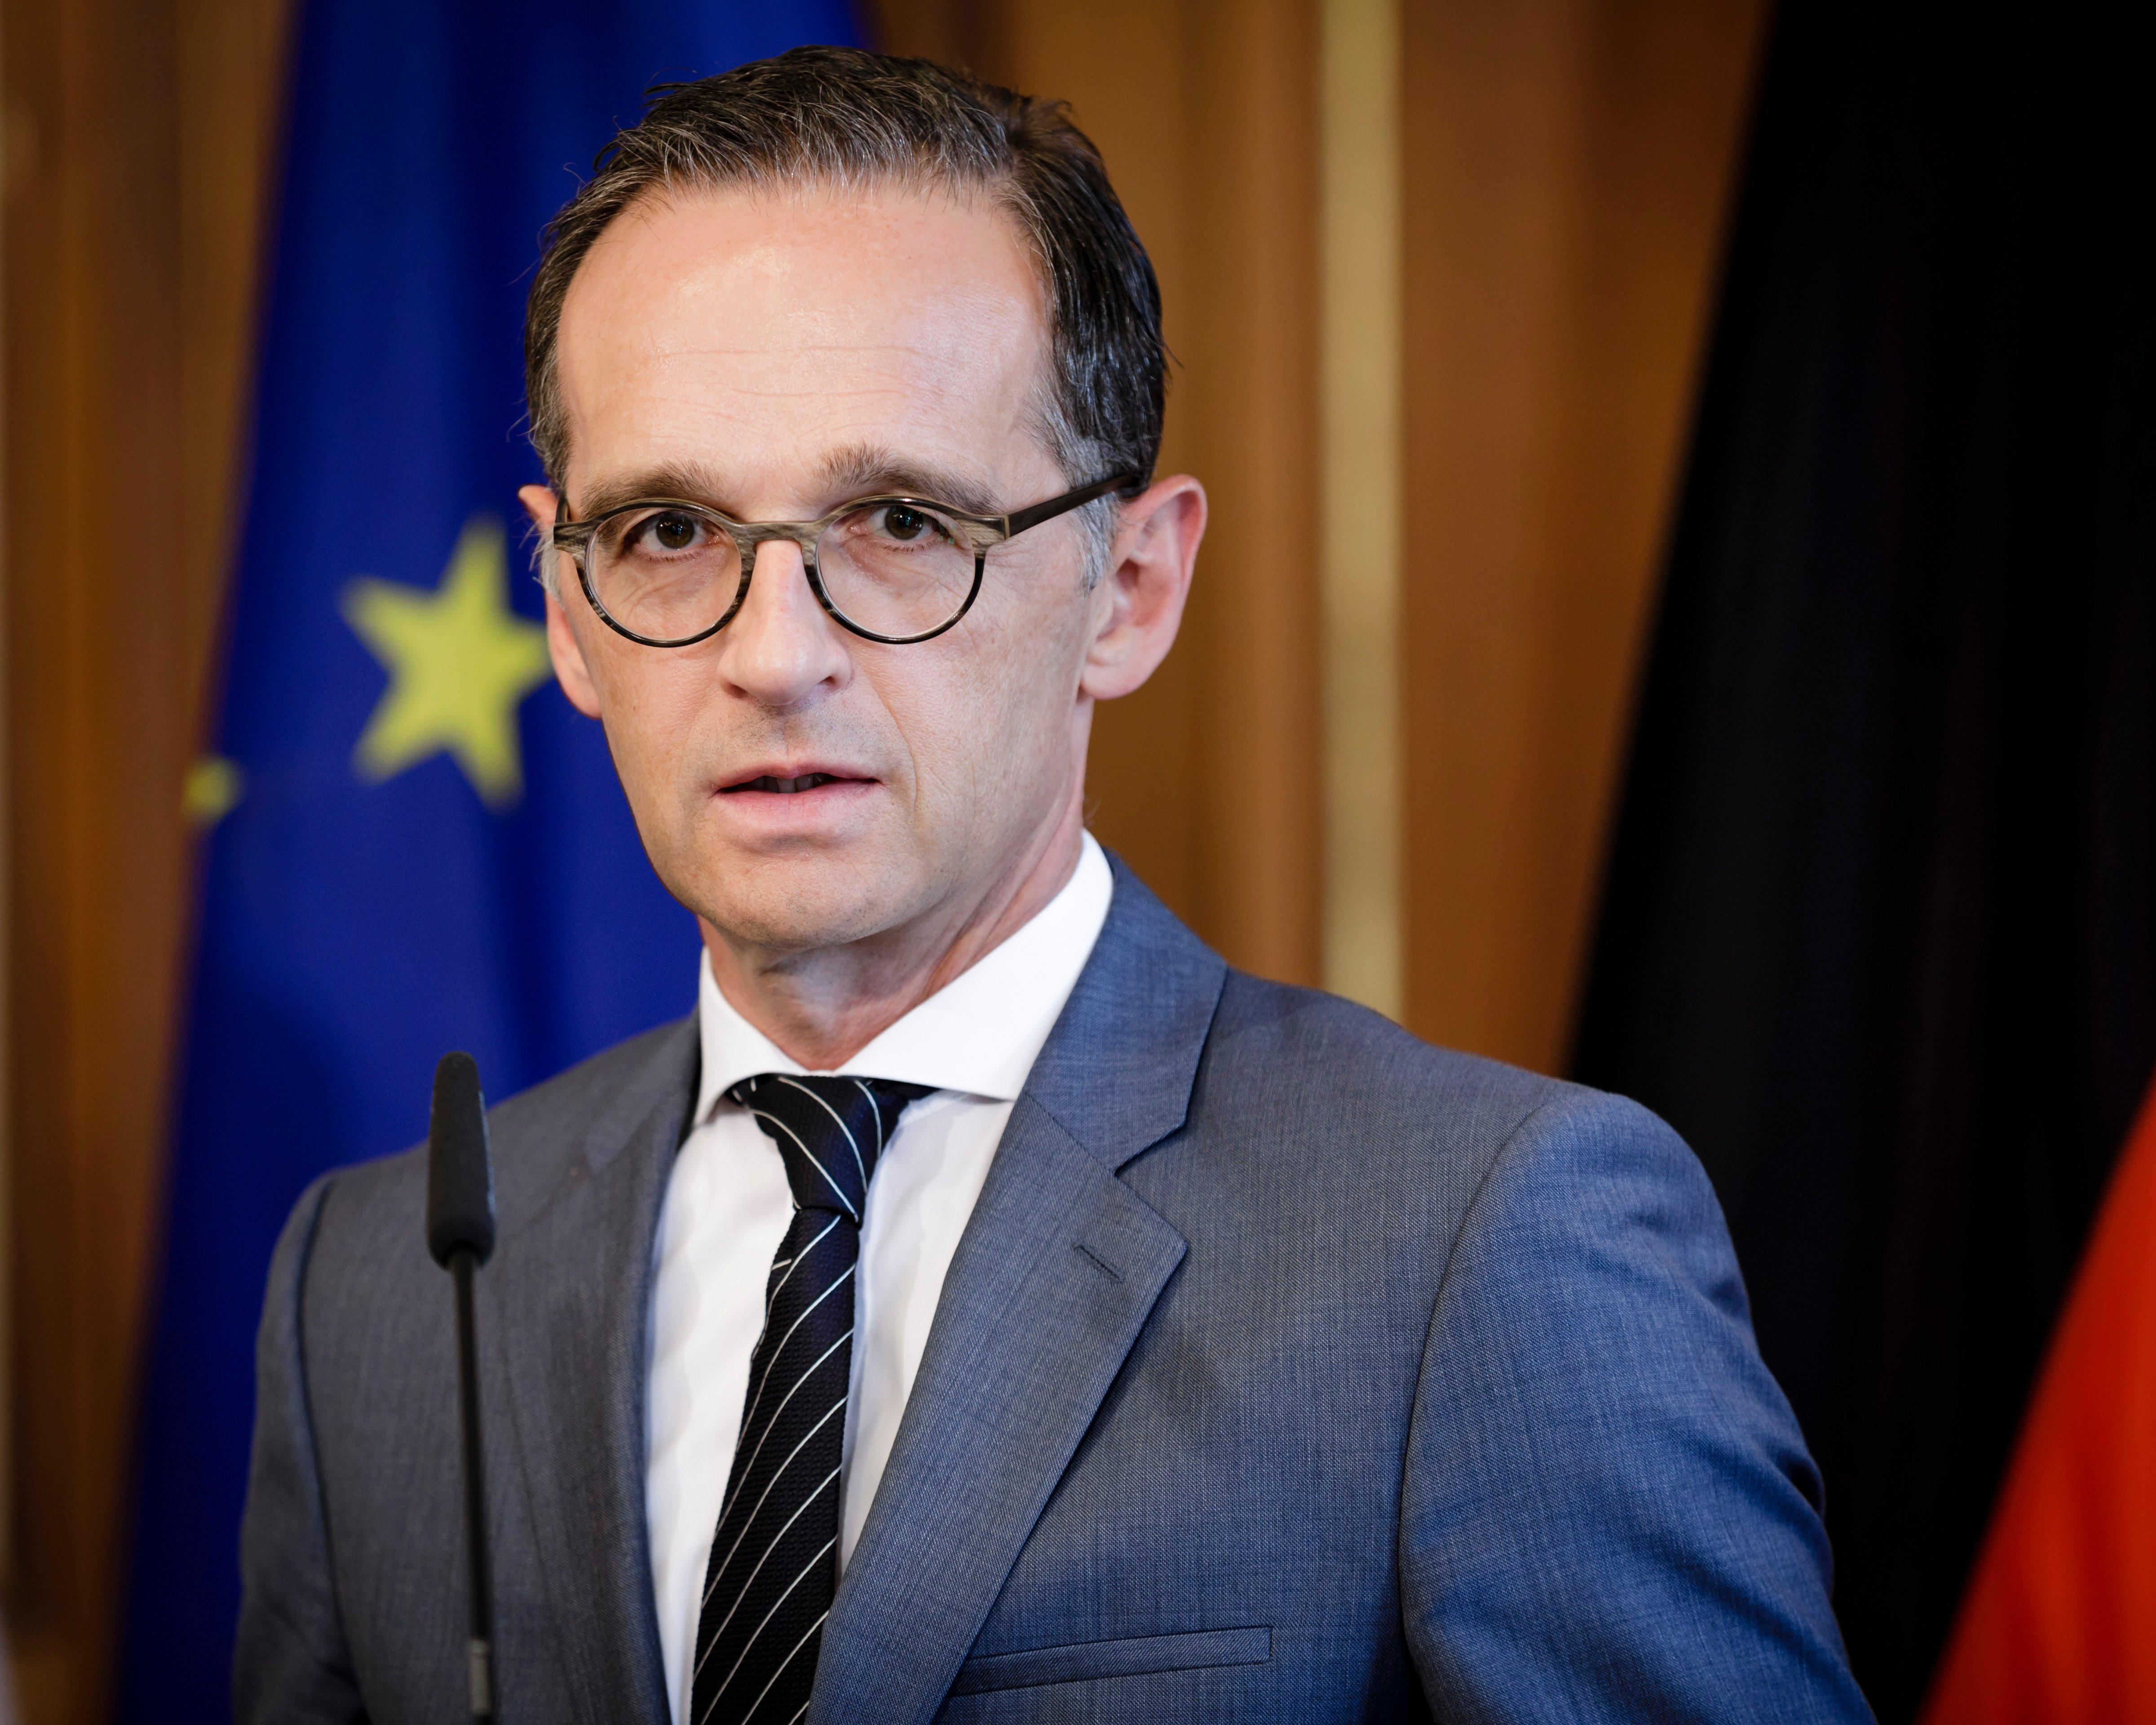 AUG 13: German Foreign Minister Heiko Maas gives a press conference in Berlin, Germany. (Inga Kjer&mdash;Photothek via Getty Images)